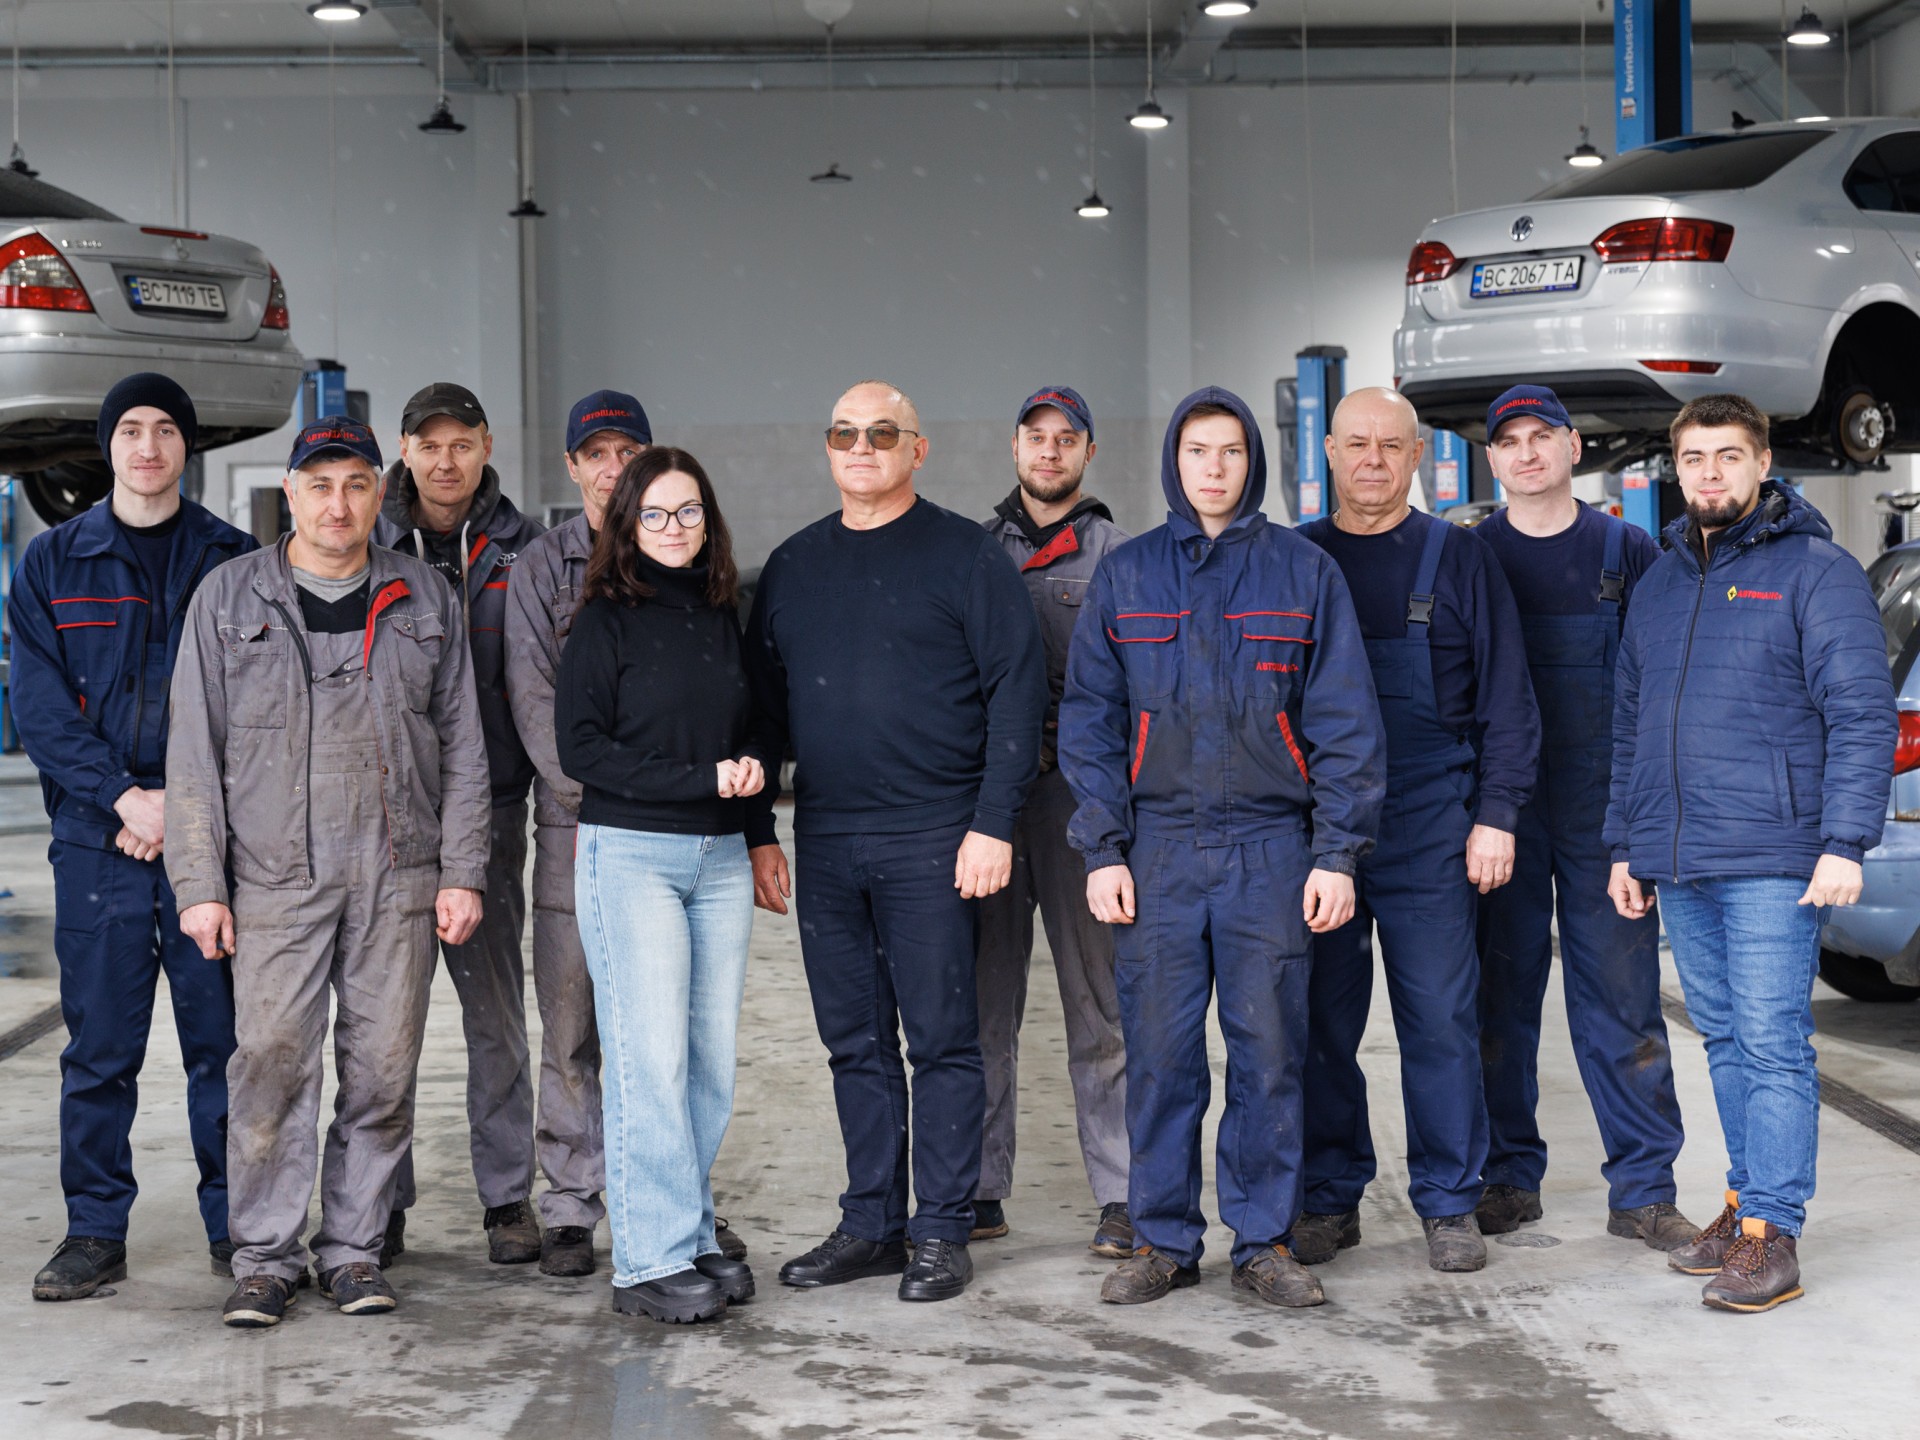 Group photo of employees at a car repair shop in the Lviv region of Ukraine